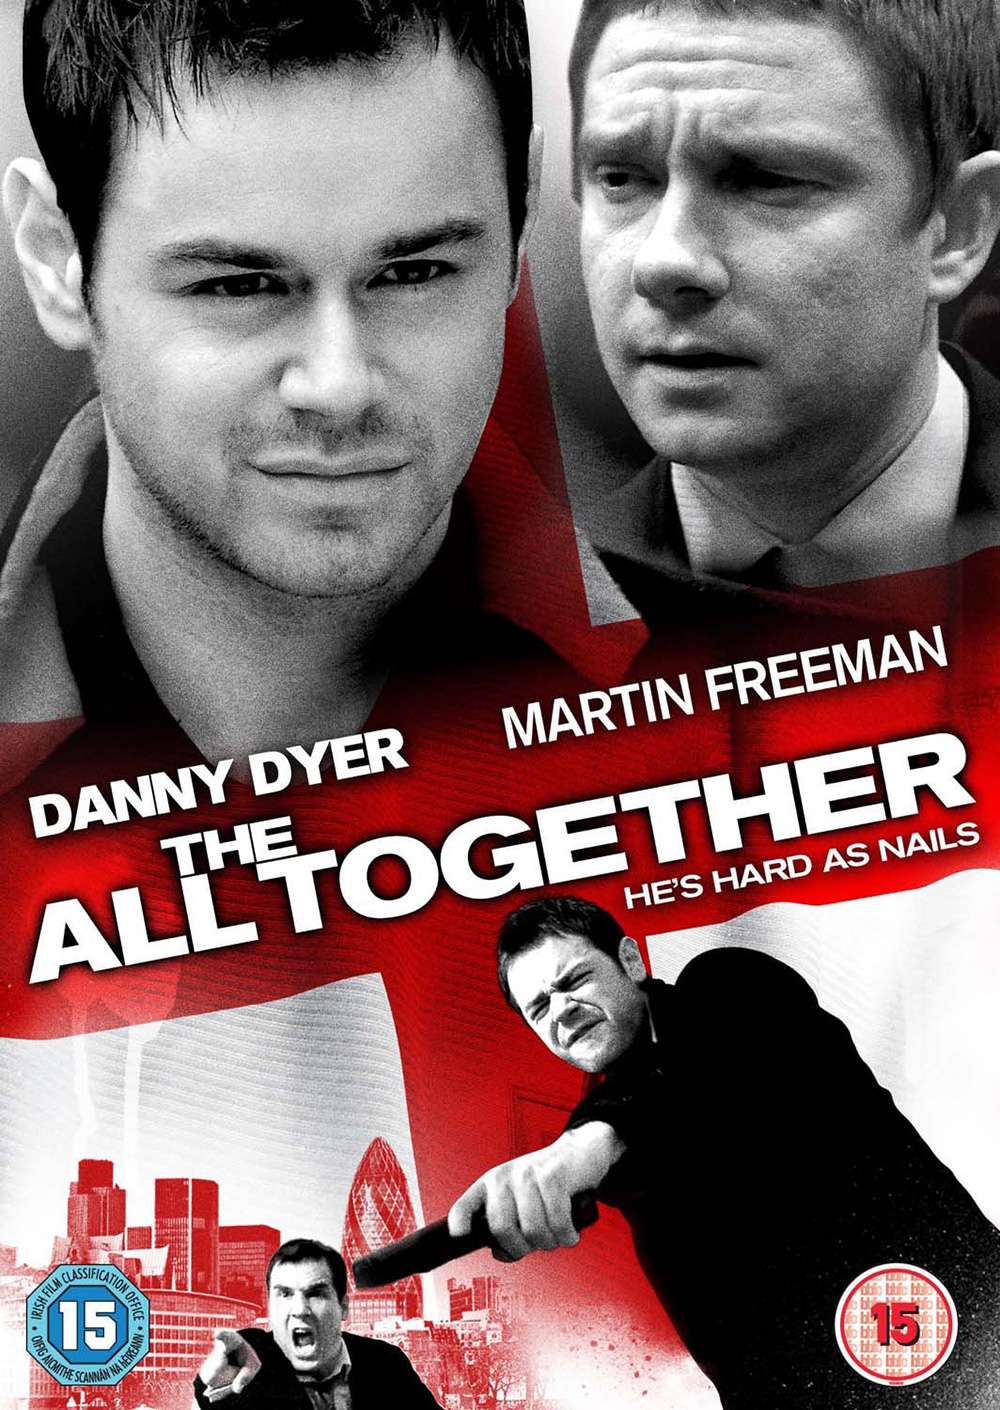 The All Together Poster | AIE Film School